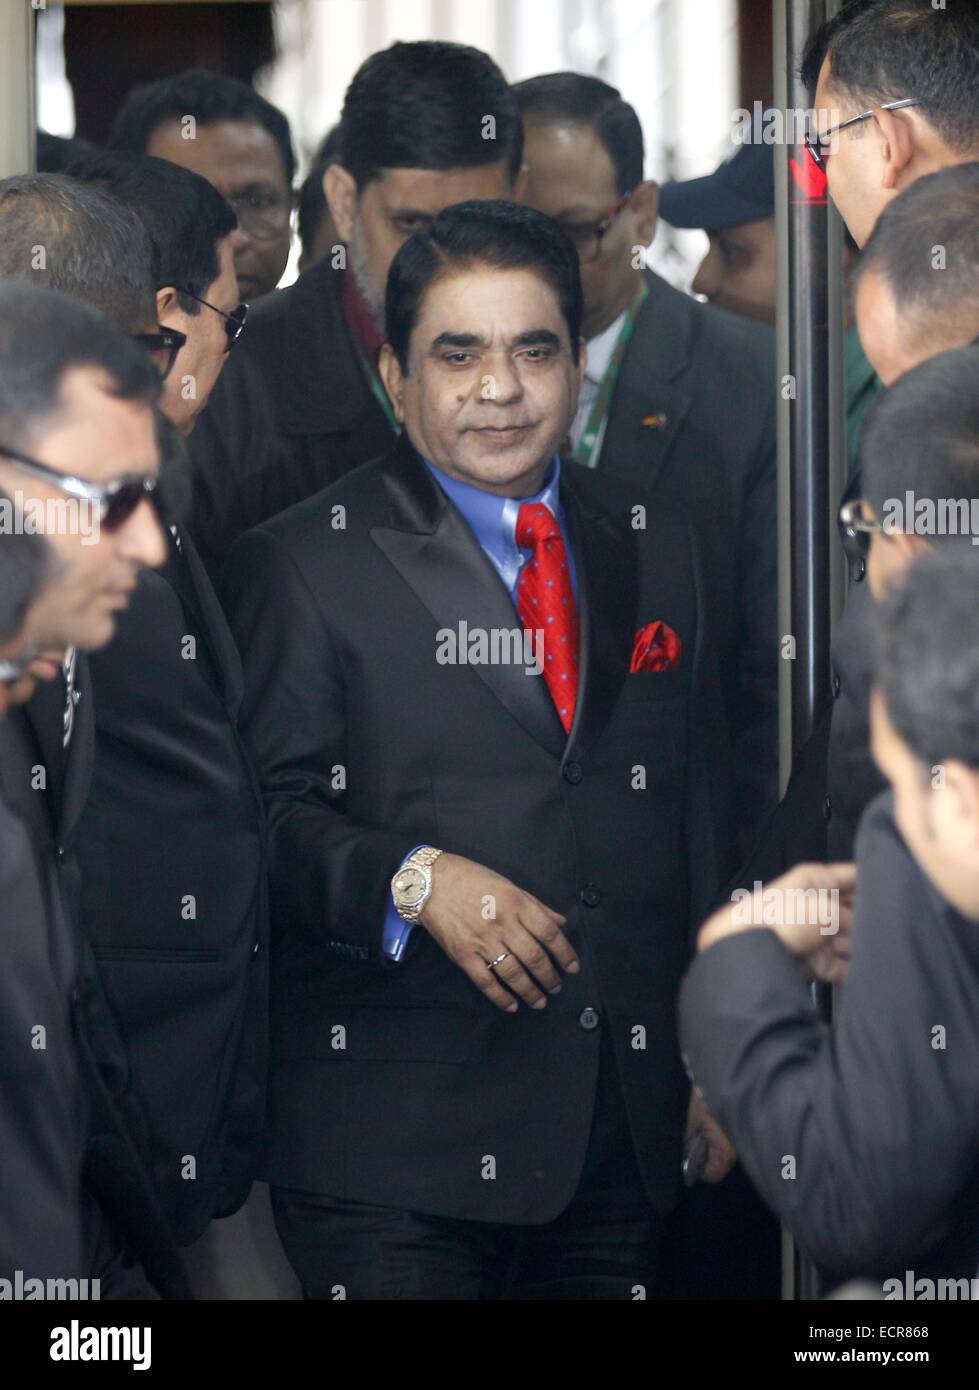 Dhaka, Bangladesh. 18th Dec, 2014. Bangladesh business tycoon Moosa bin  Shamsher, as he defended allegations of money laundering during grilling by  Anti Corruption Commission (ACC) officials. on 18 December 2014, Dhaka,  Bangladesh.